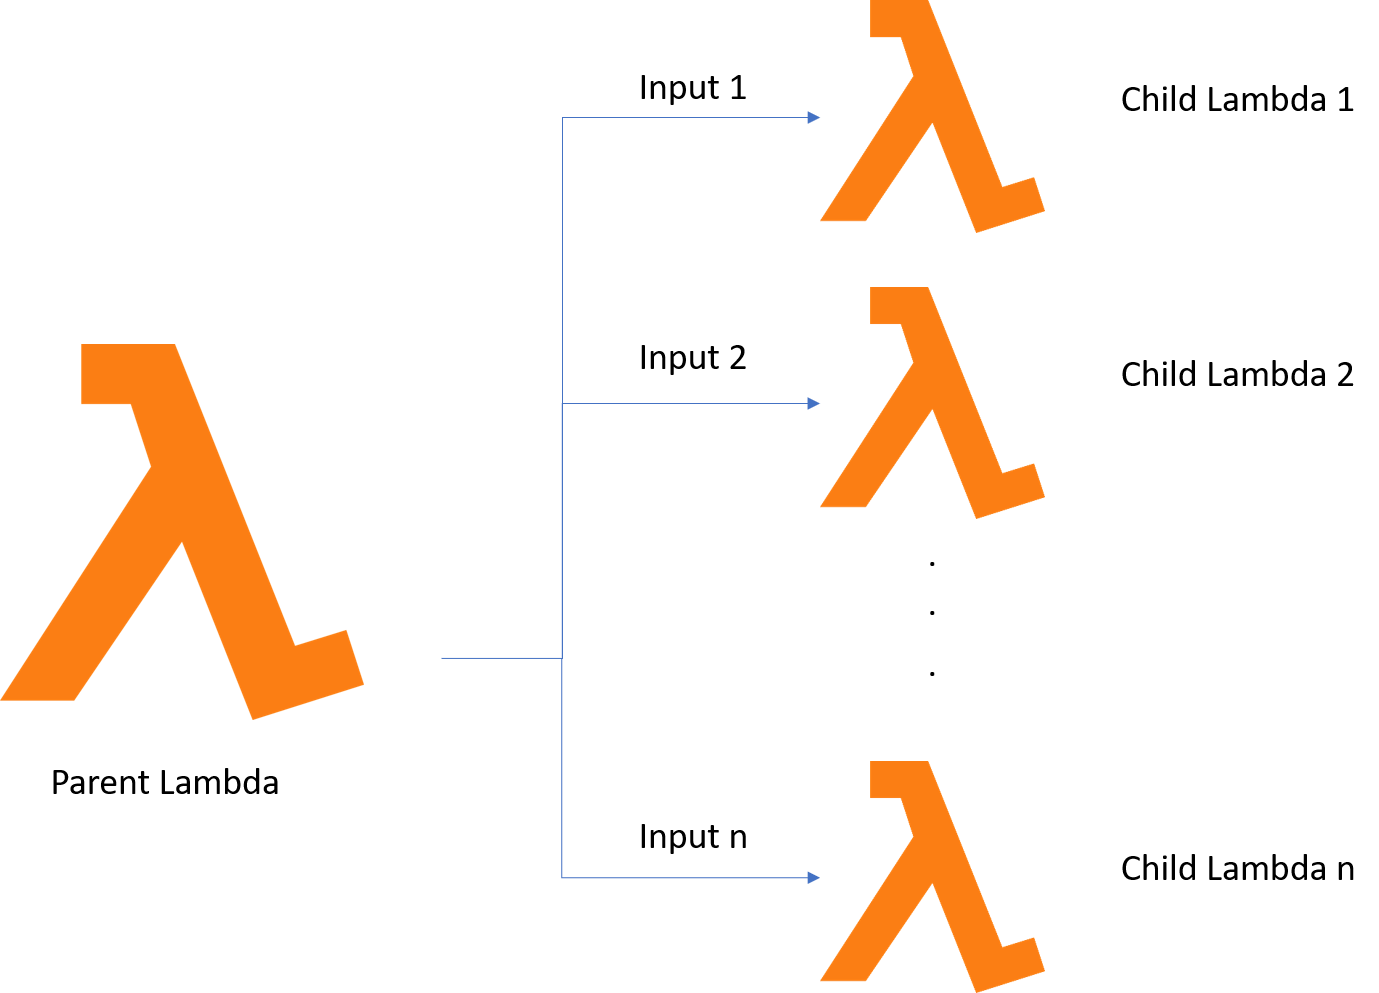 Triggering one AWS lambda from another using the serverless framework, by  Yash Sanghvi, Tech@Carnot